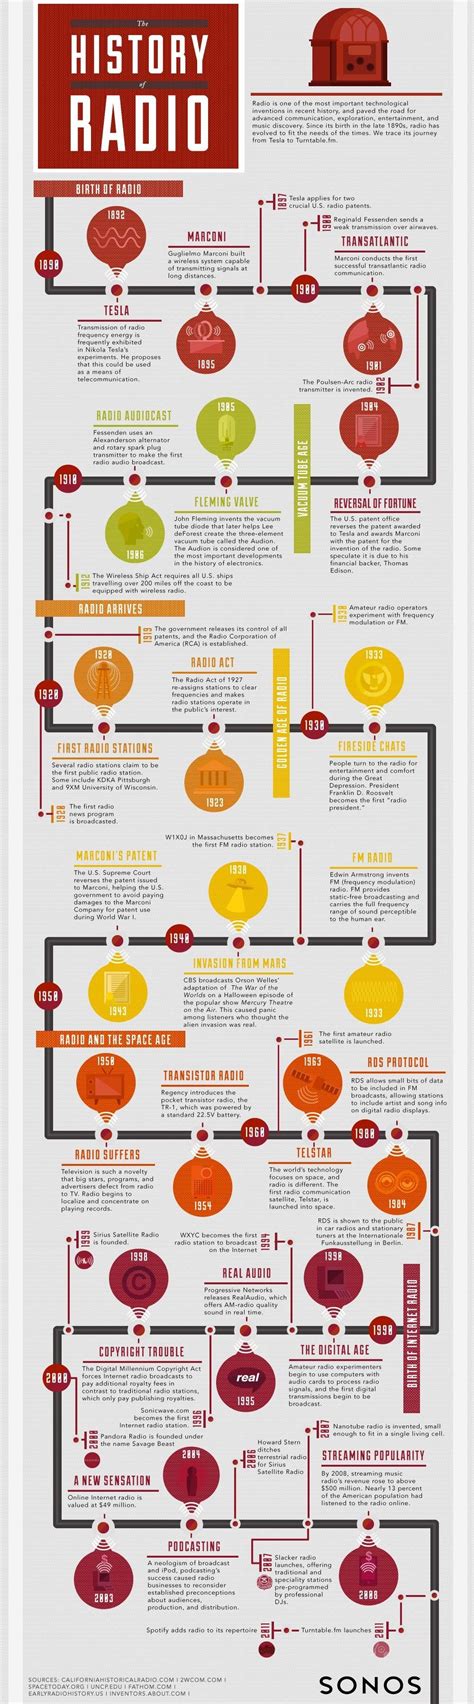 The Entire History Of Radio In One Simple Infographic Digital Trends